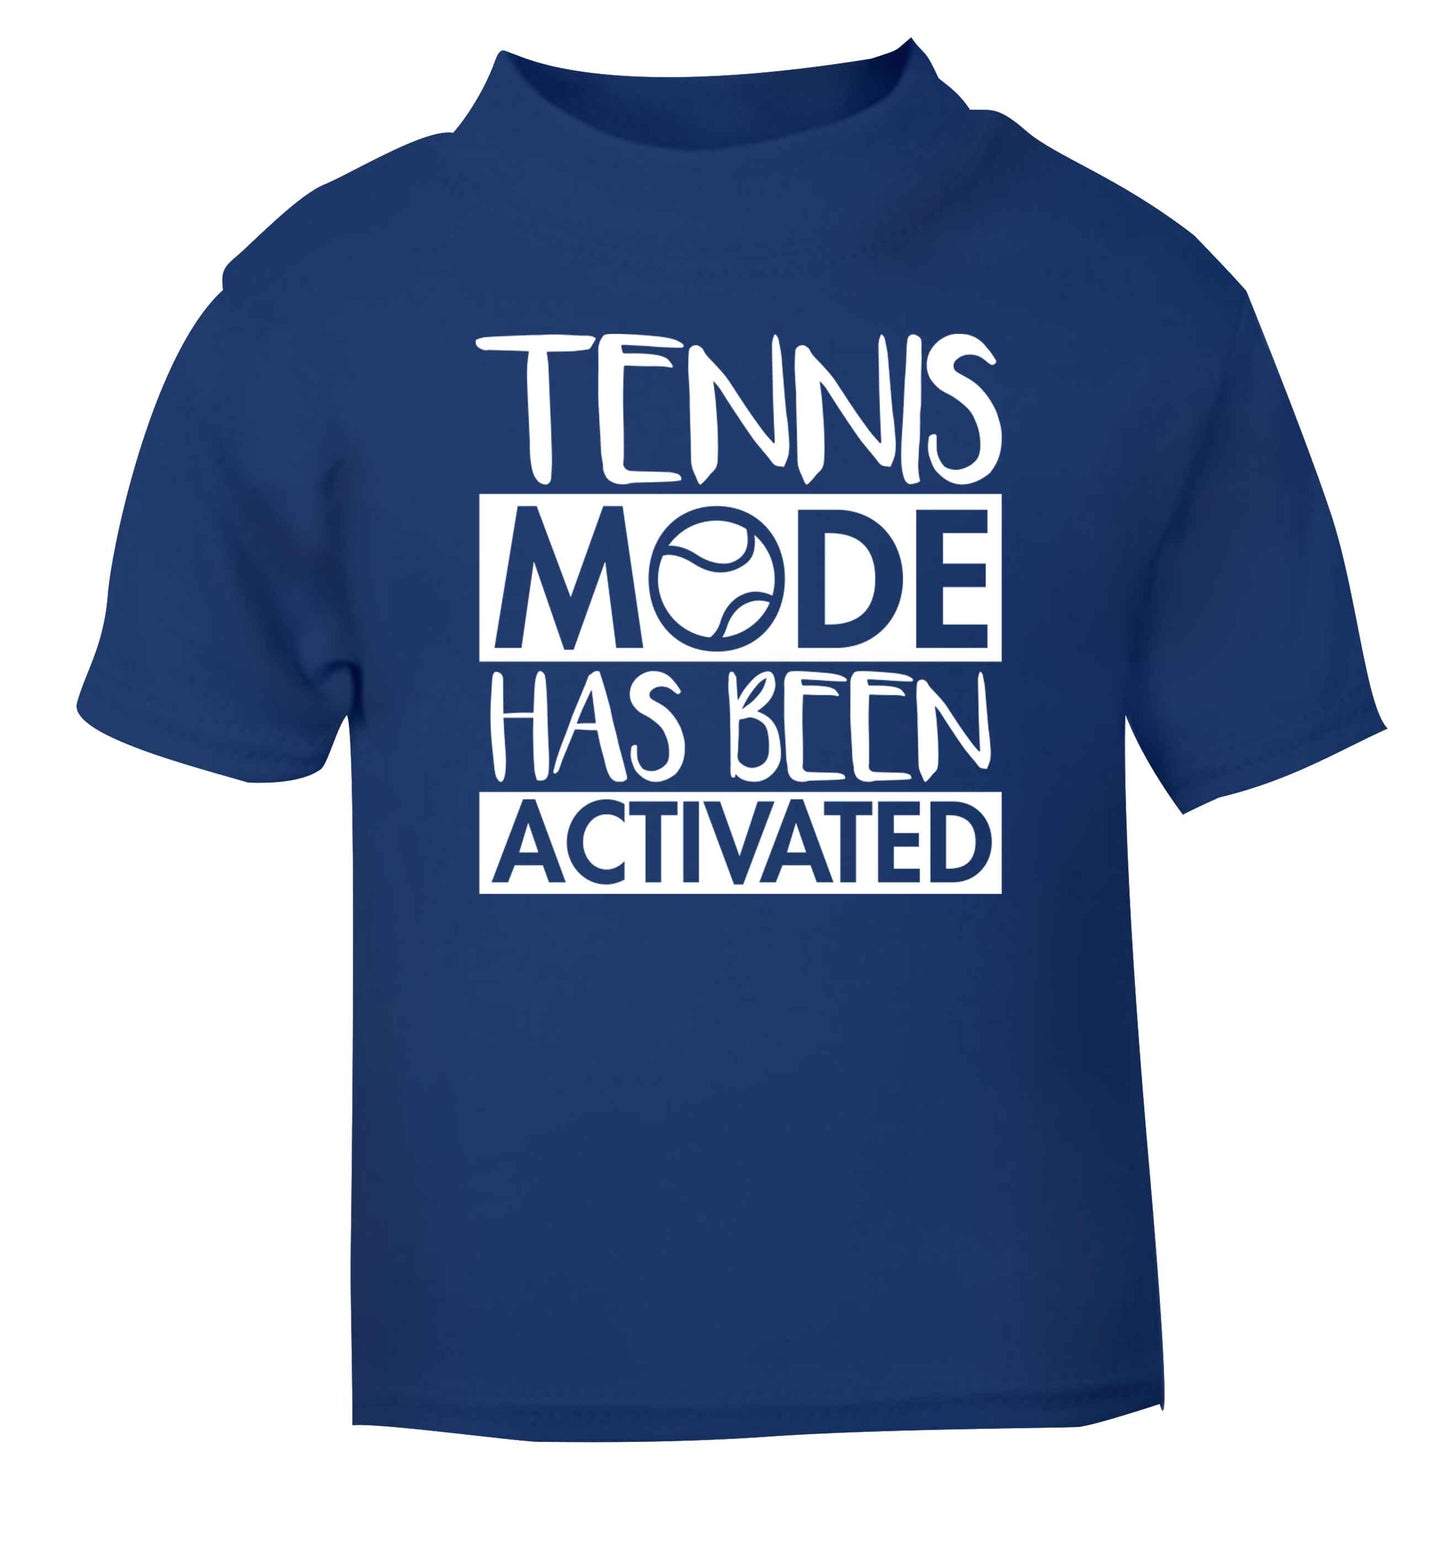 Tennis mode has been activated blue Baby Toddler Tshirt 2 Years